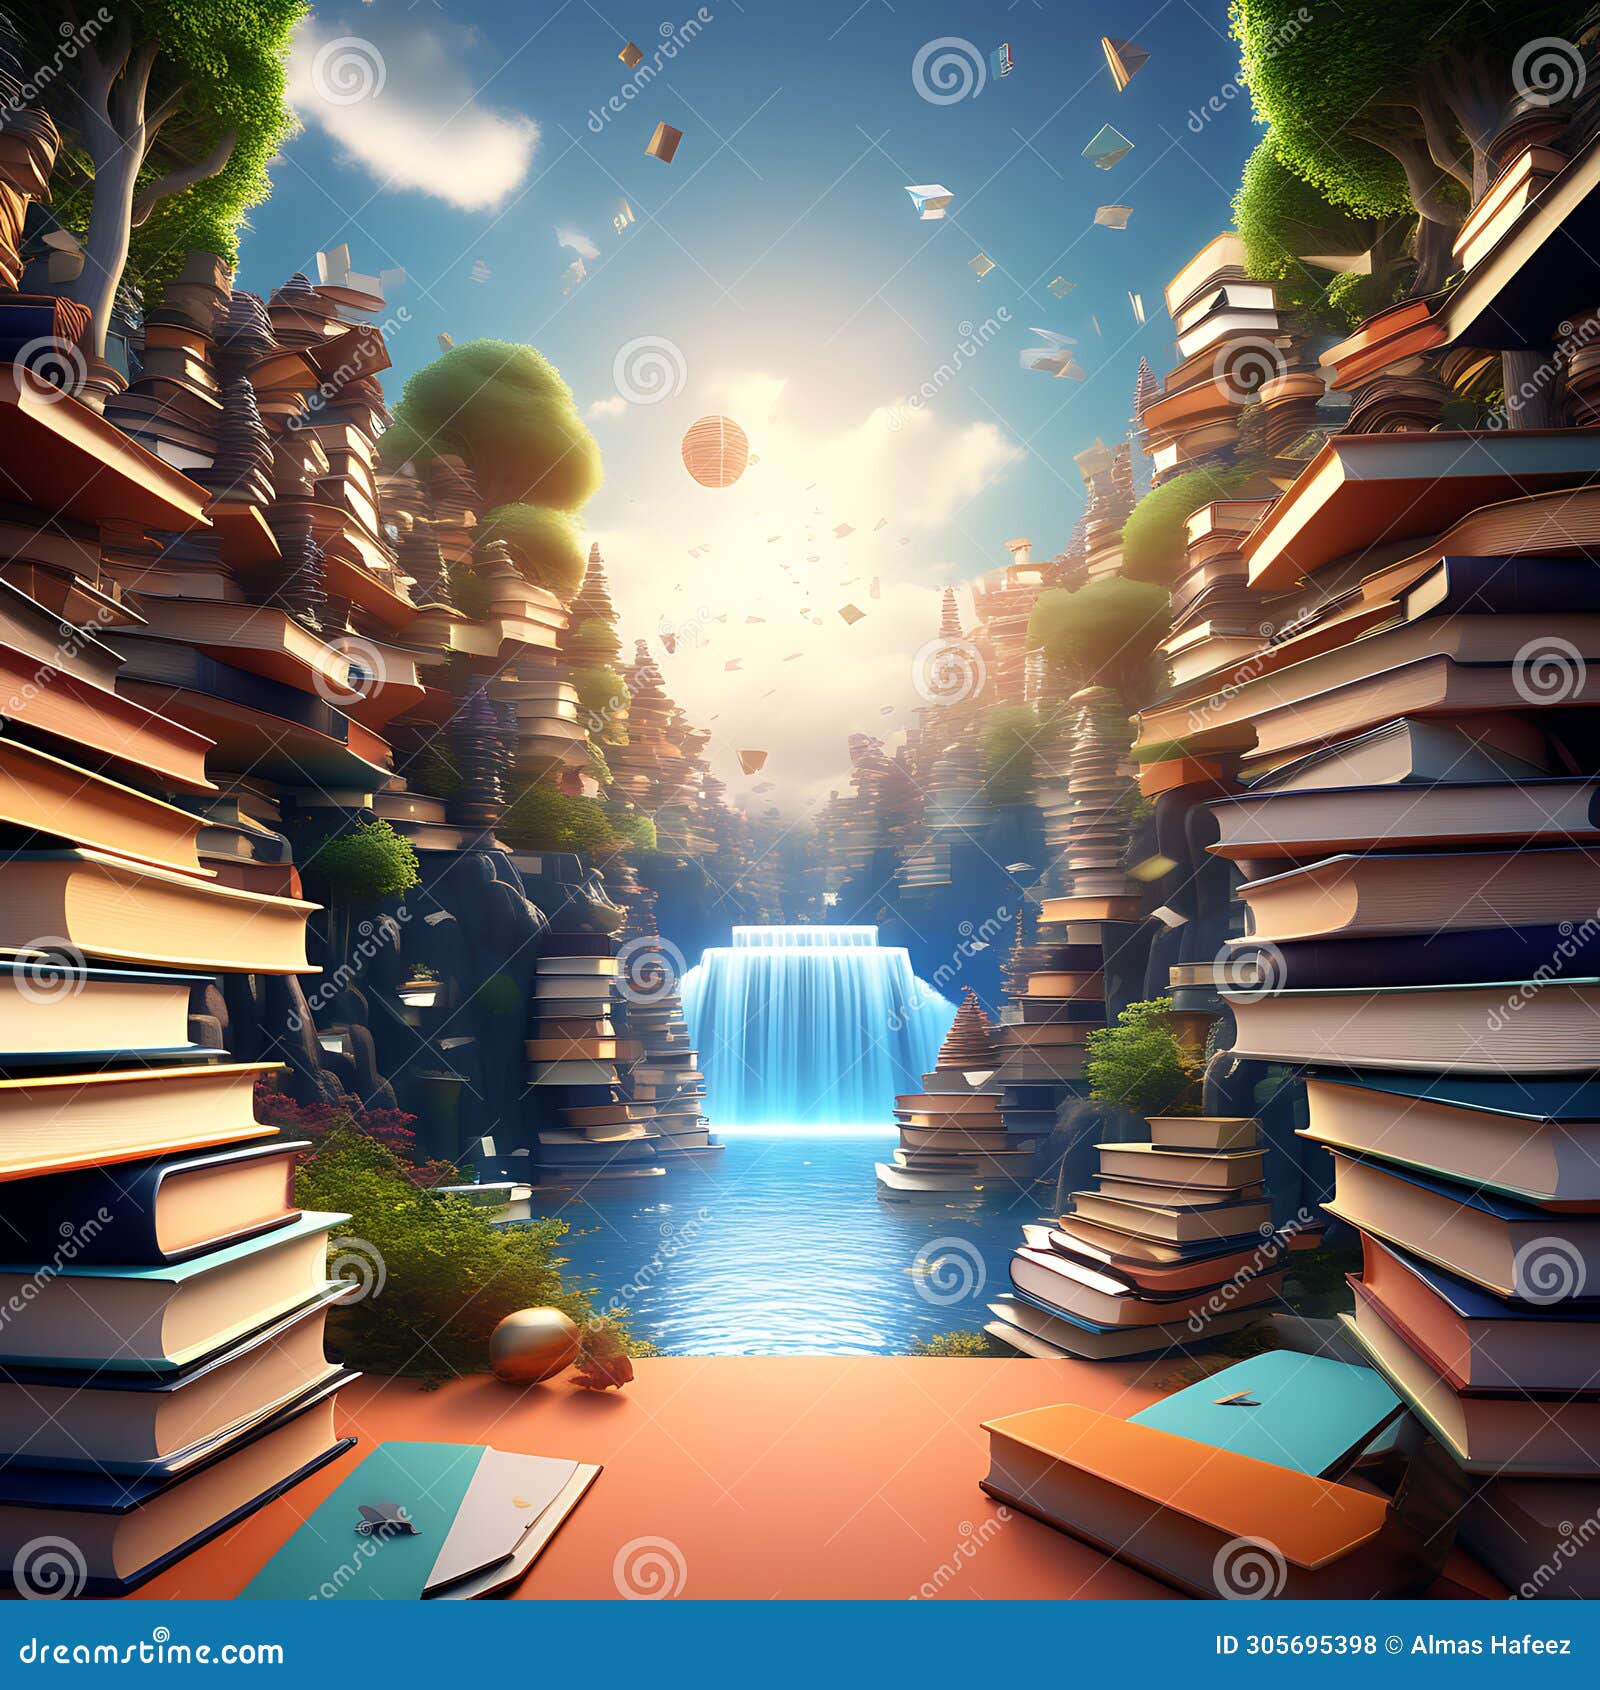 worlds unveiled: 3d  of books igniting imagination Ã¢â¬â generated by ai